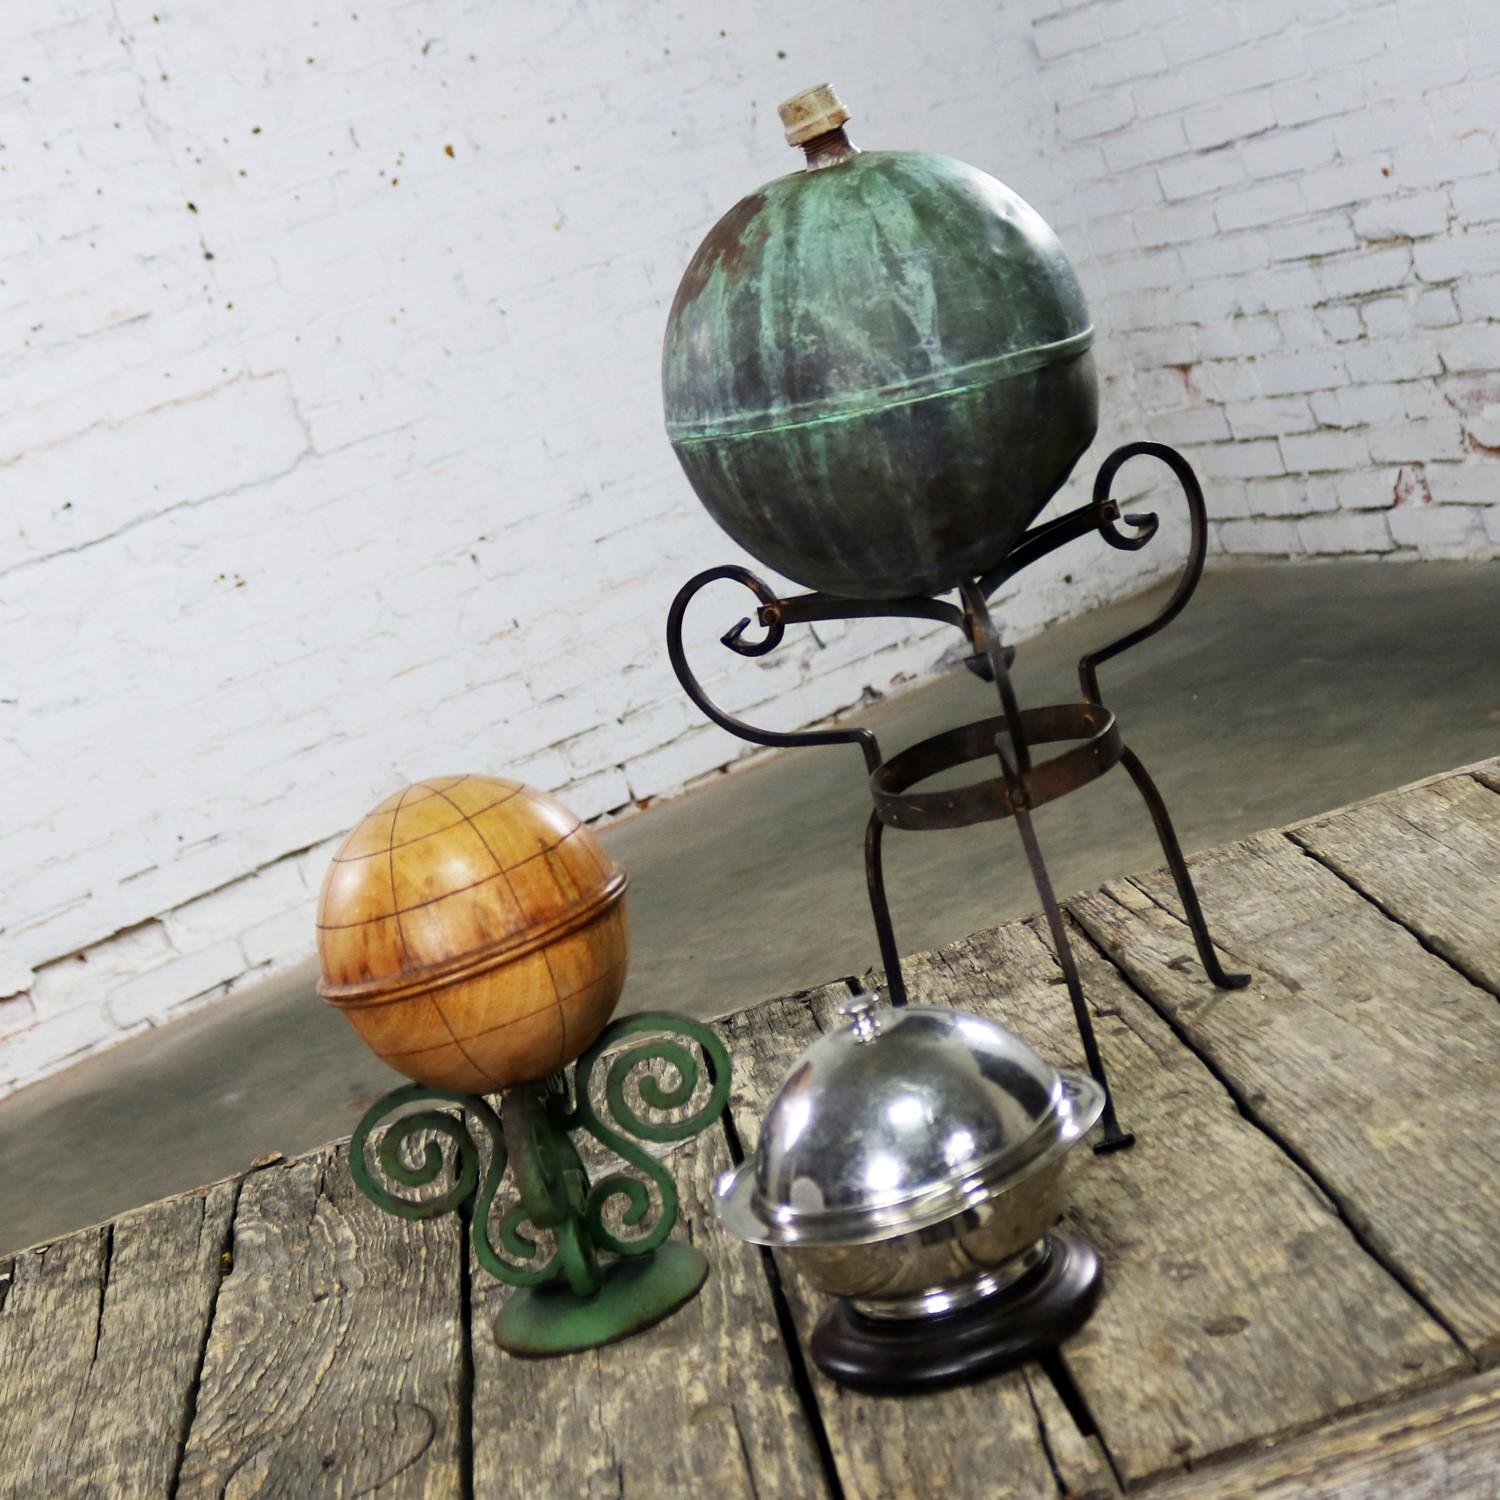 Collection of Orb Objects on Stands als Centerpiece oder Object d'Art im Angebot 4